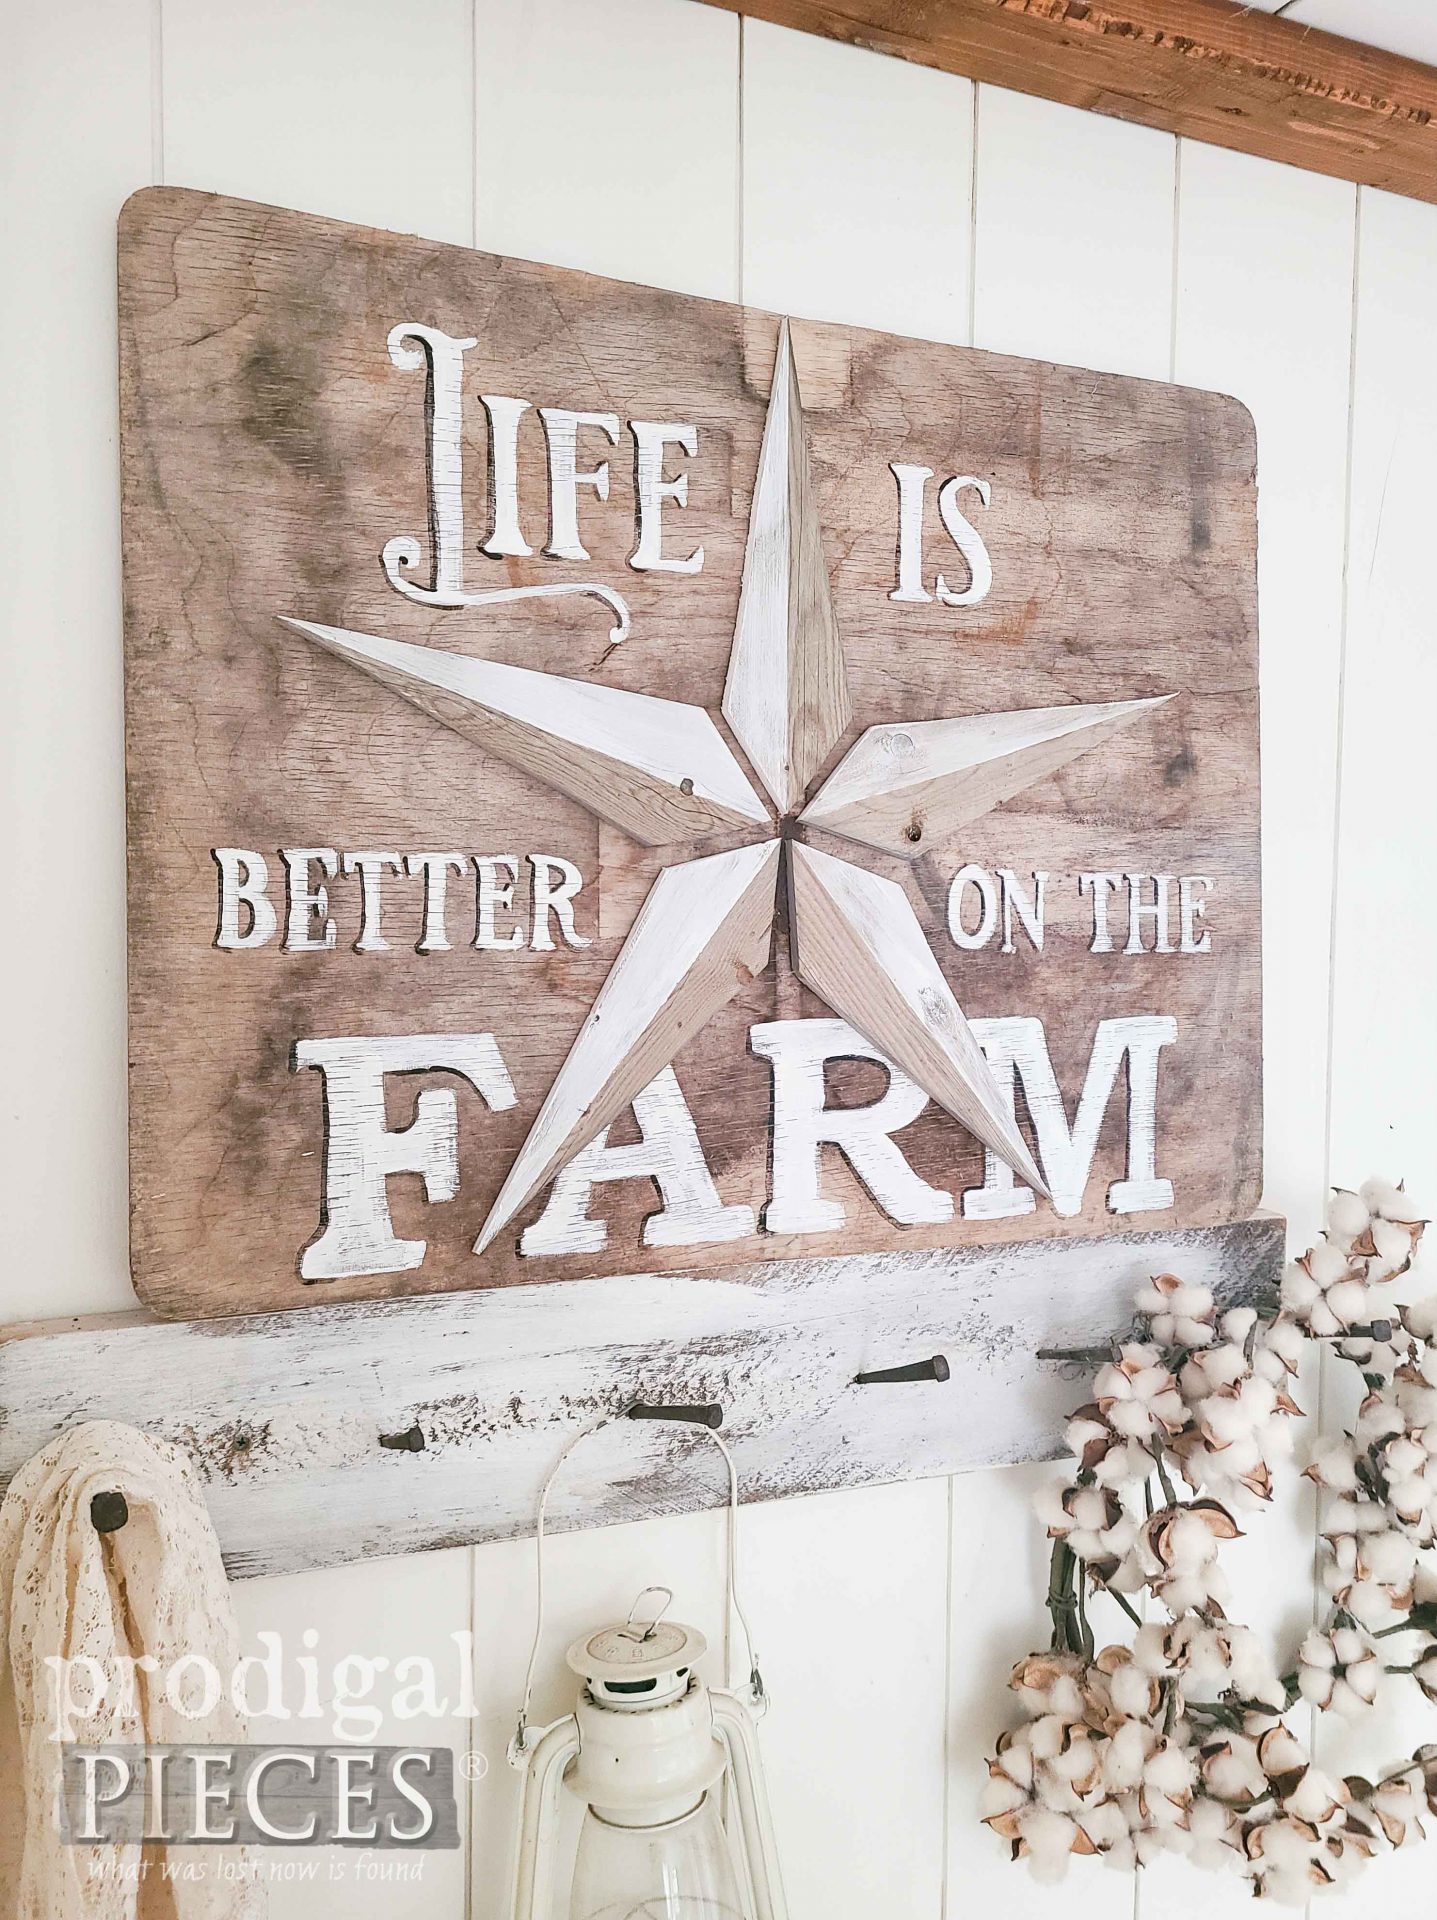 DIY Reclaimed Wood Star Farmhouse Sign by Larissa of Prodigal Pieces | prodigalpieces.com #prodigalpieces #farmhouse #diy #reclaimed